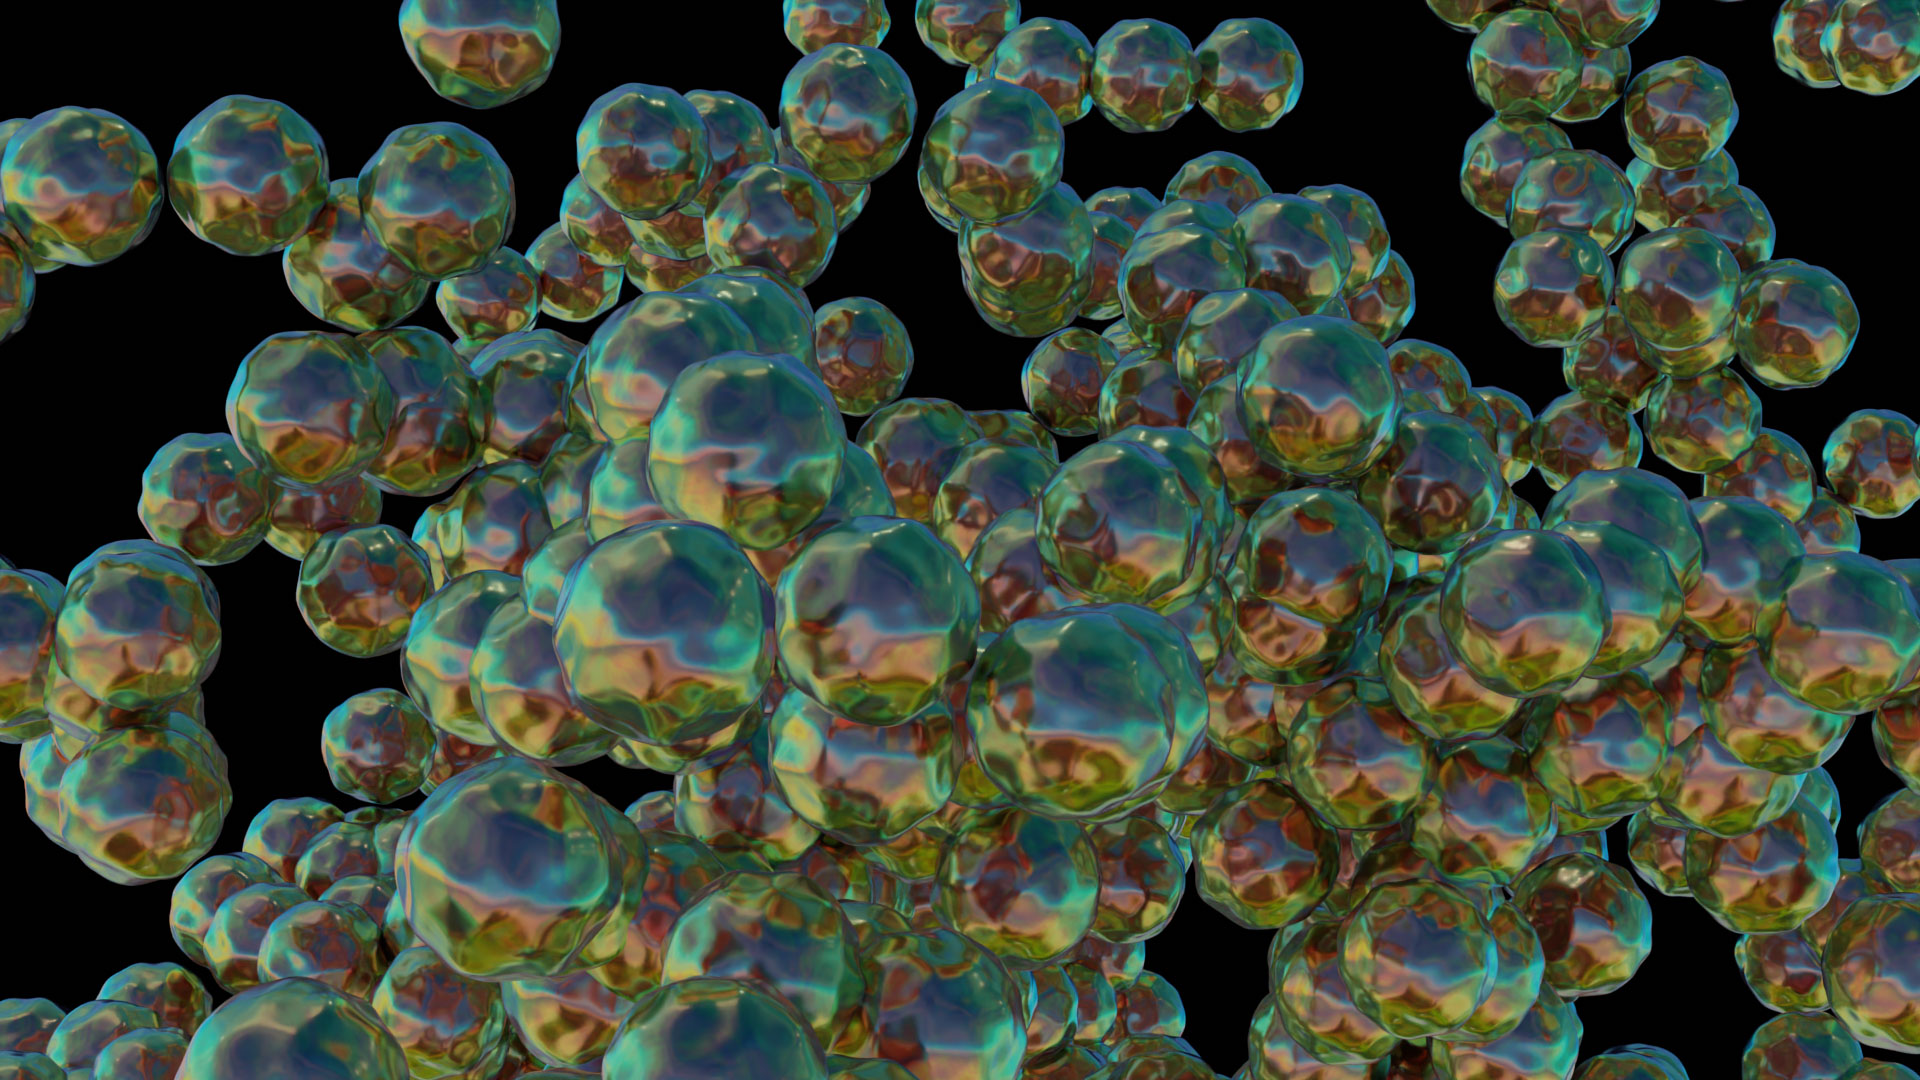 A still image of 3D molecular animations drawn from epigenetic research on environmental influences on gene expression. The animations look shiney glass orbs floating in black space.